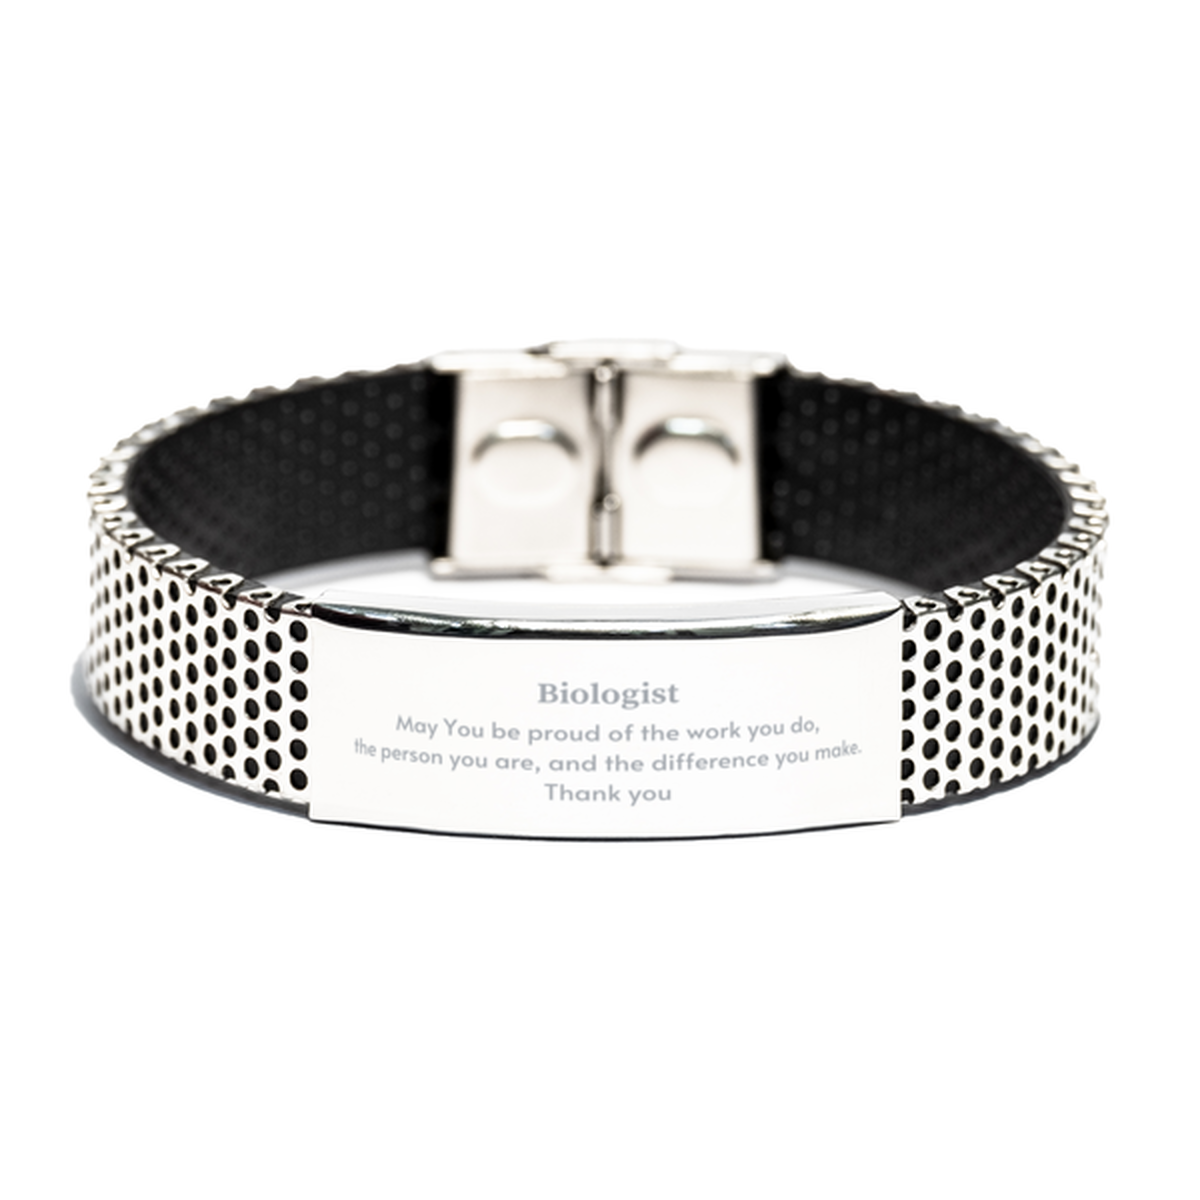 Heartwarming Stainless Steel Bracelet Retirement Coworkers Gifts for Biologist, Biologist May You be proud of the work you do, the person you are Gifts for Boss Men Women Friends